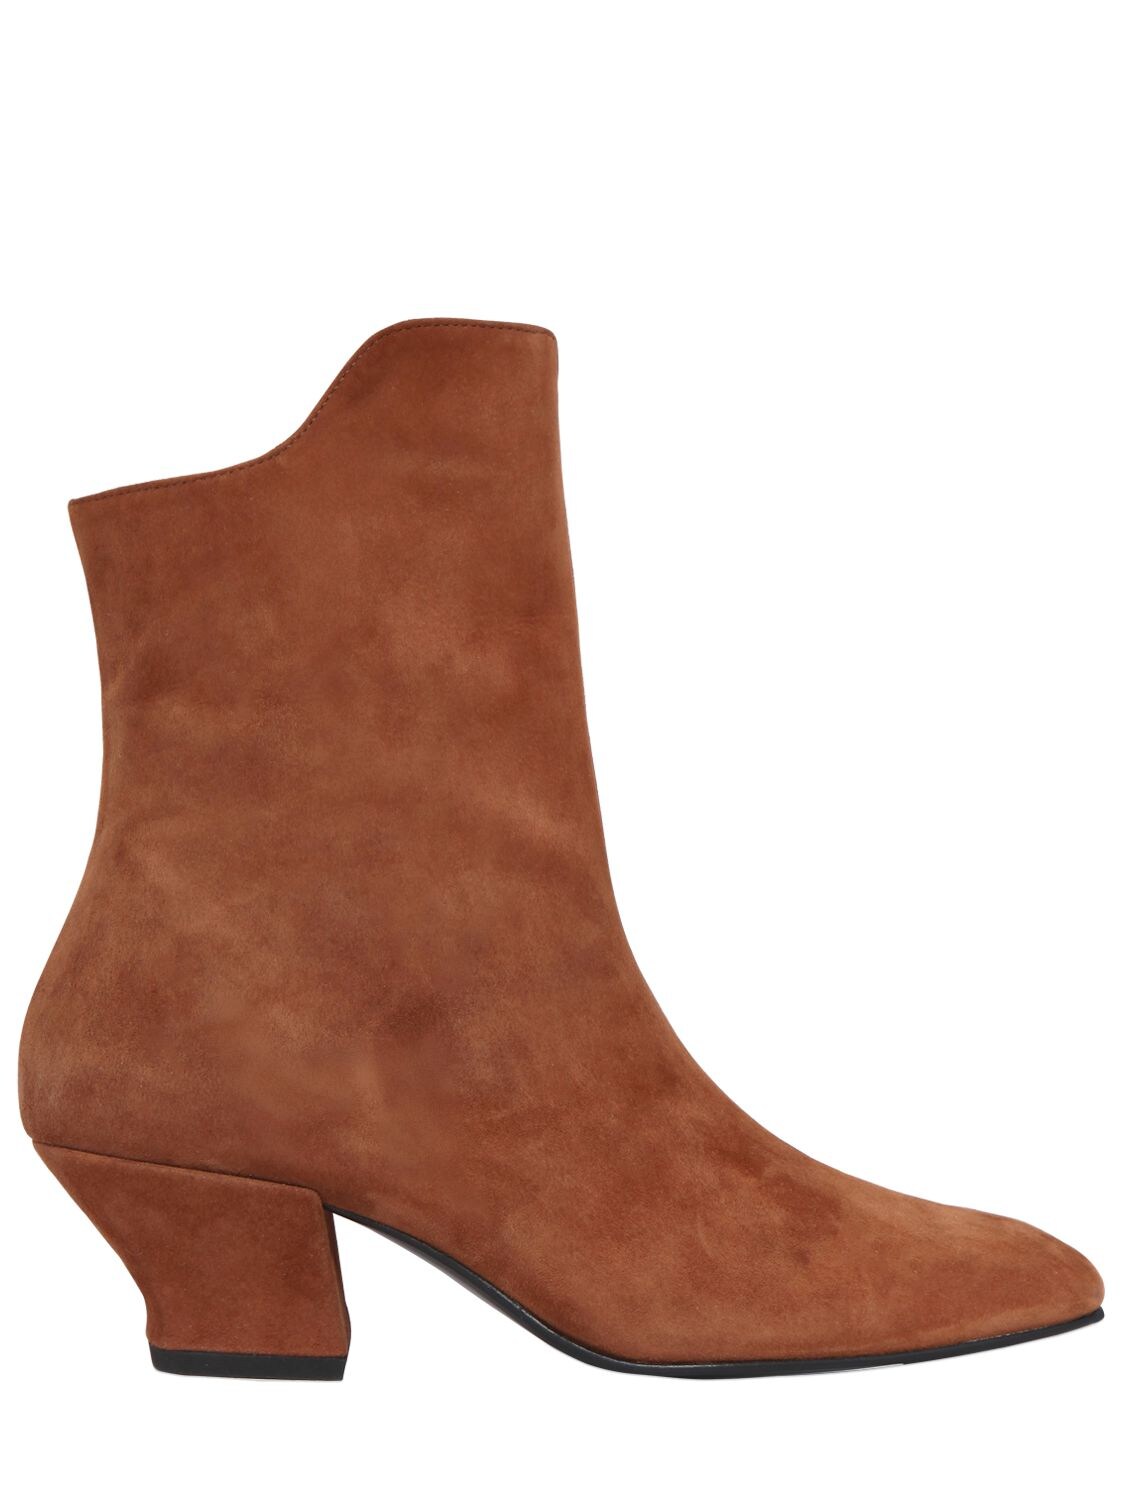 DORATEYMUR 50MM HAN SUEDE ANKLE BOOTS,67ILOD002-VEFO0